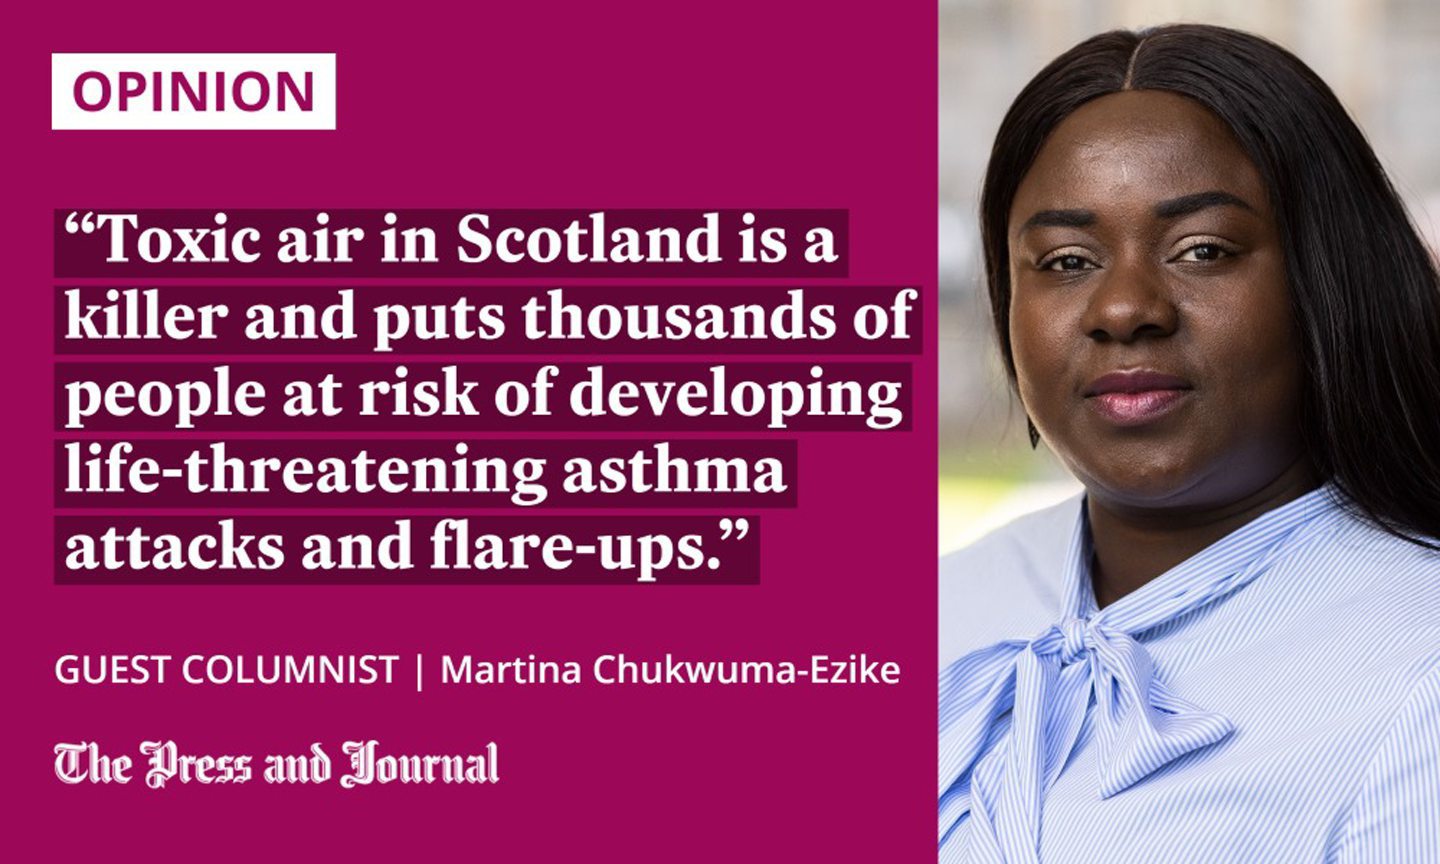 Guest columnist, Martina Chukwuma-Ezike, speaks up about air pollution: "Toxic air in Scotland is a killer and puts thousands of people at risk of developing life-threatening asthma attacks and flare-ups."